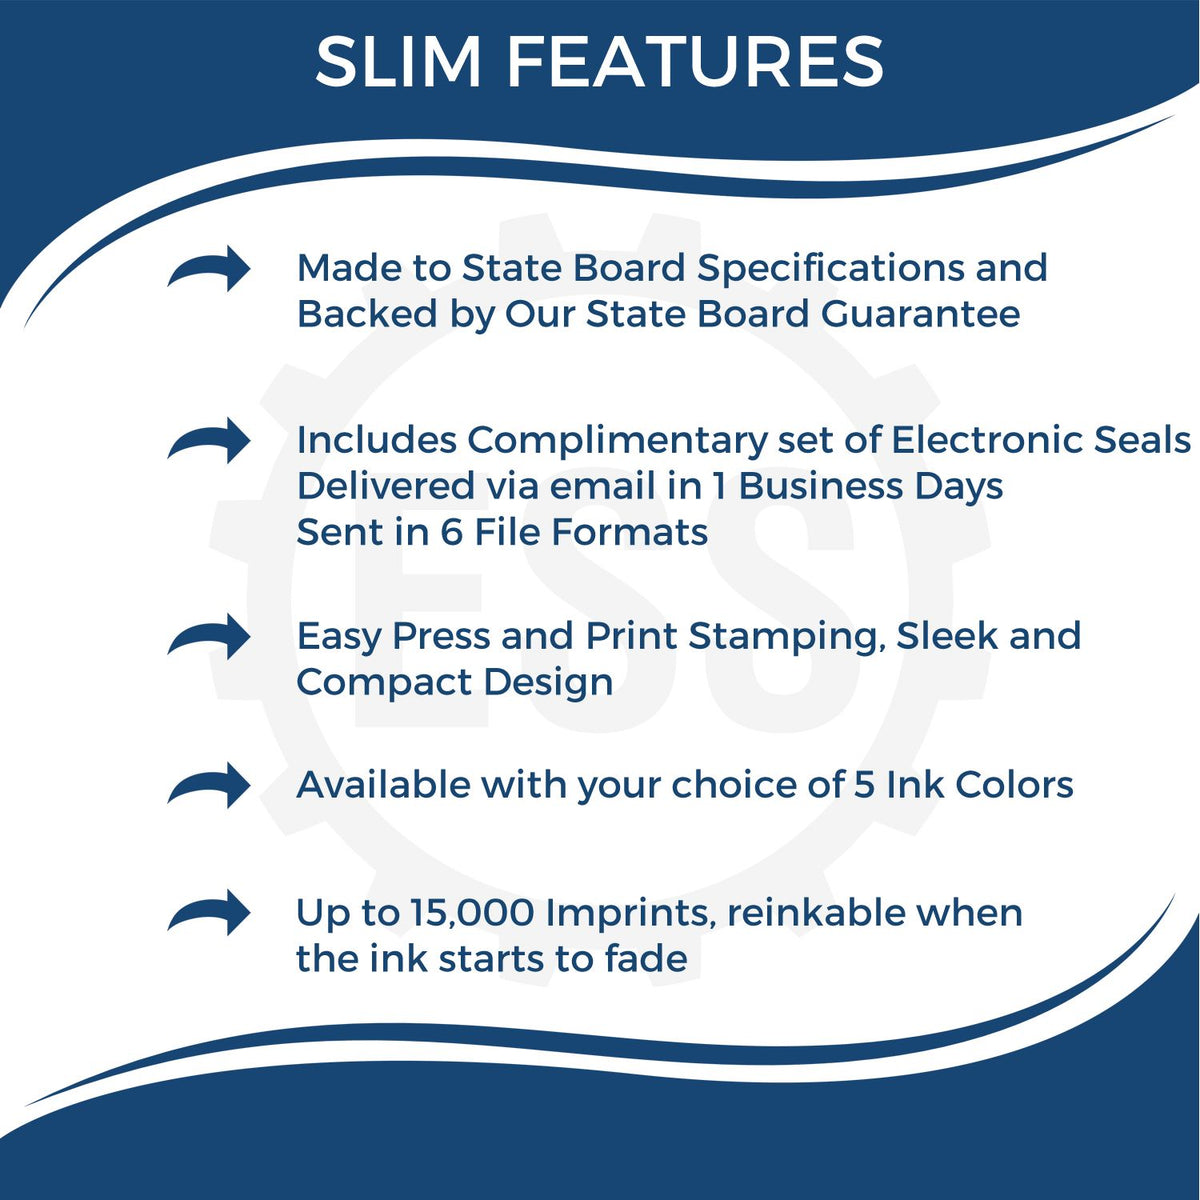 A picture of an infographic highlighting the selling points for the Super Slim New Hampshire Notary Public Stamp